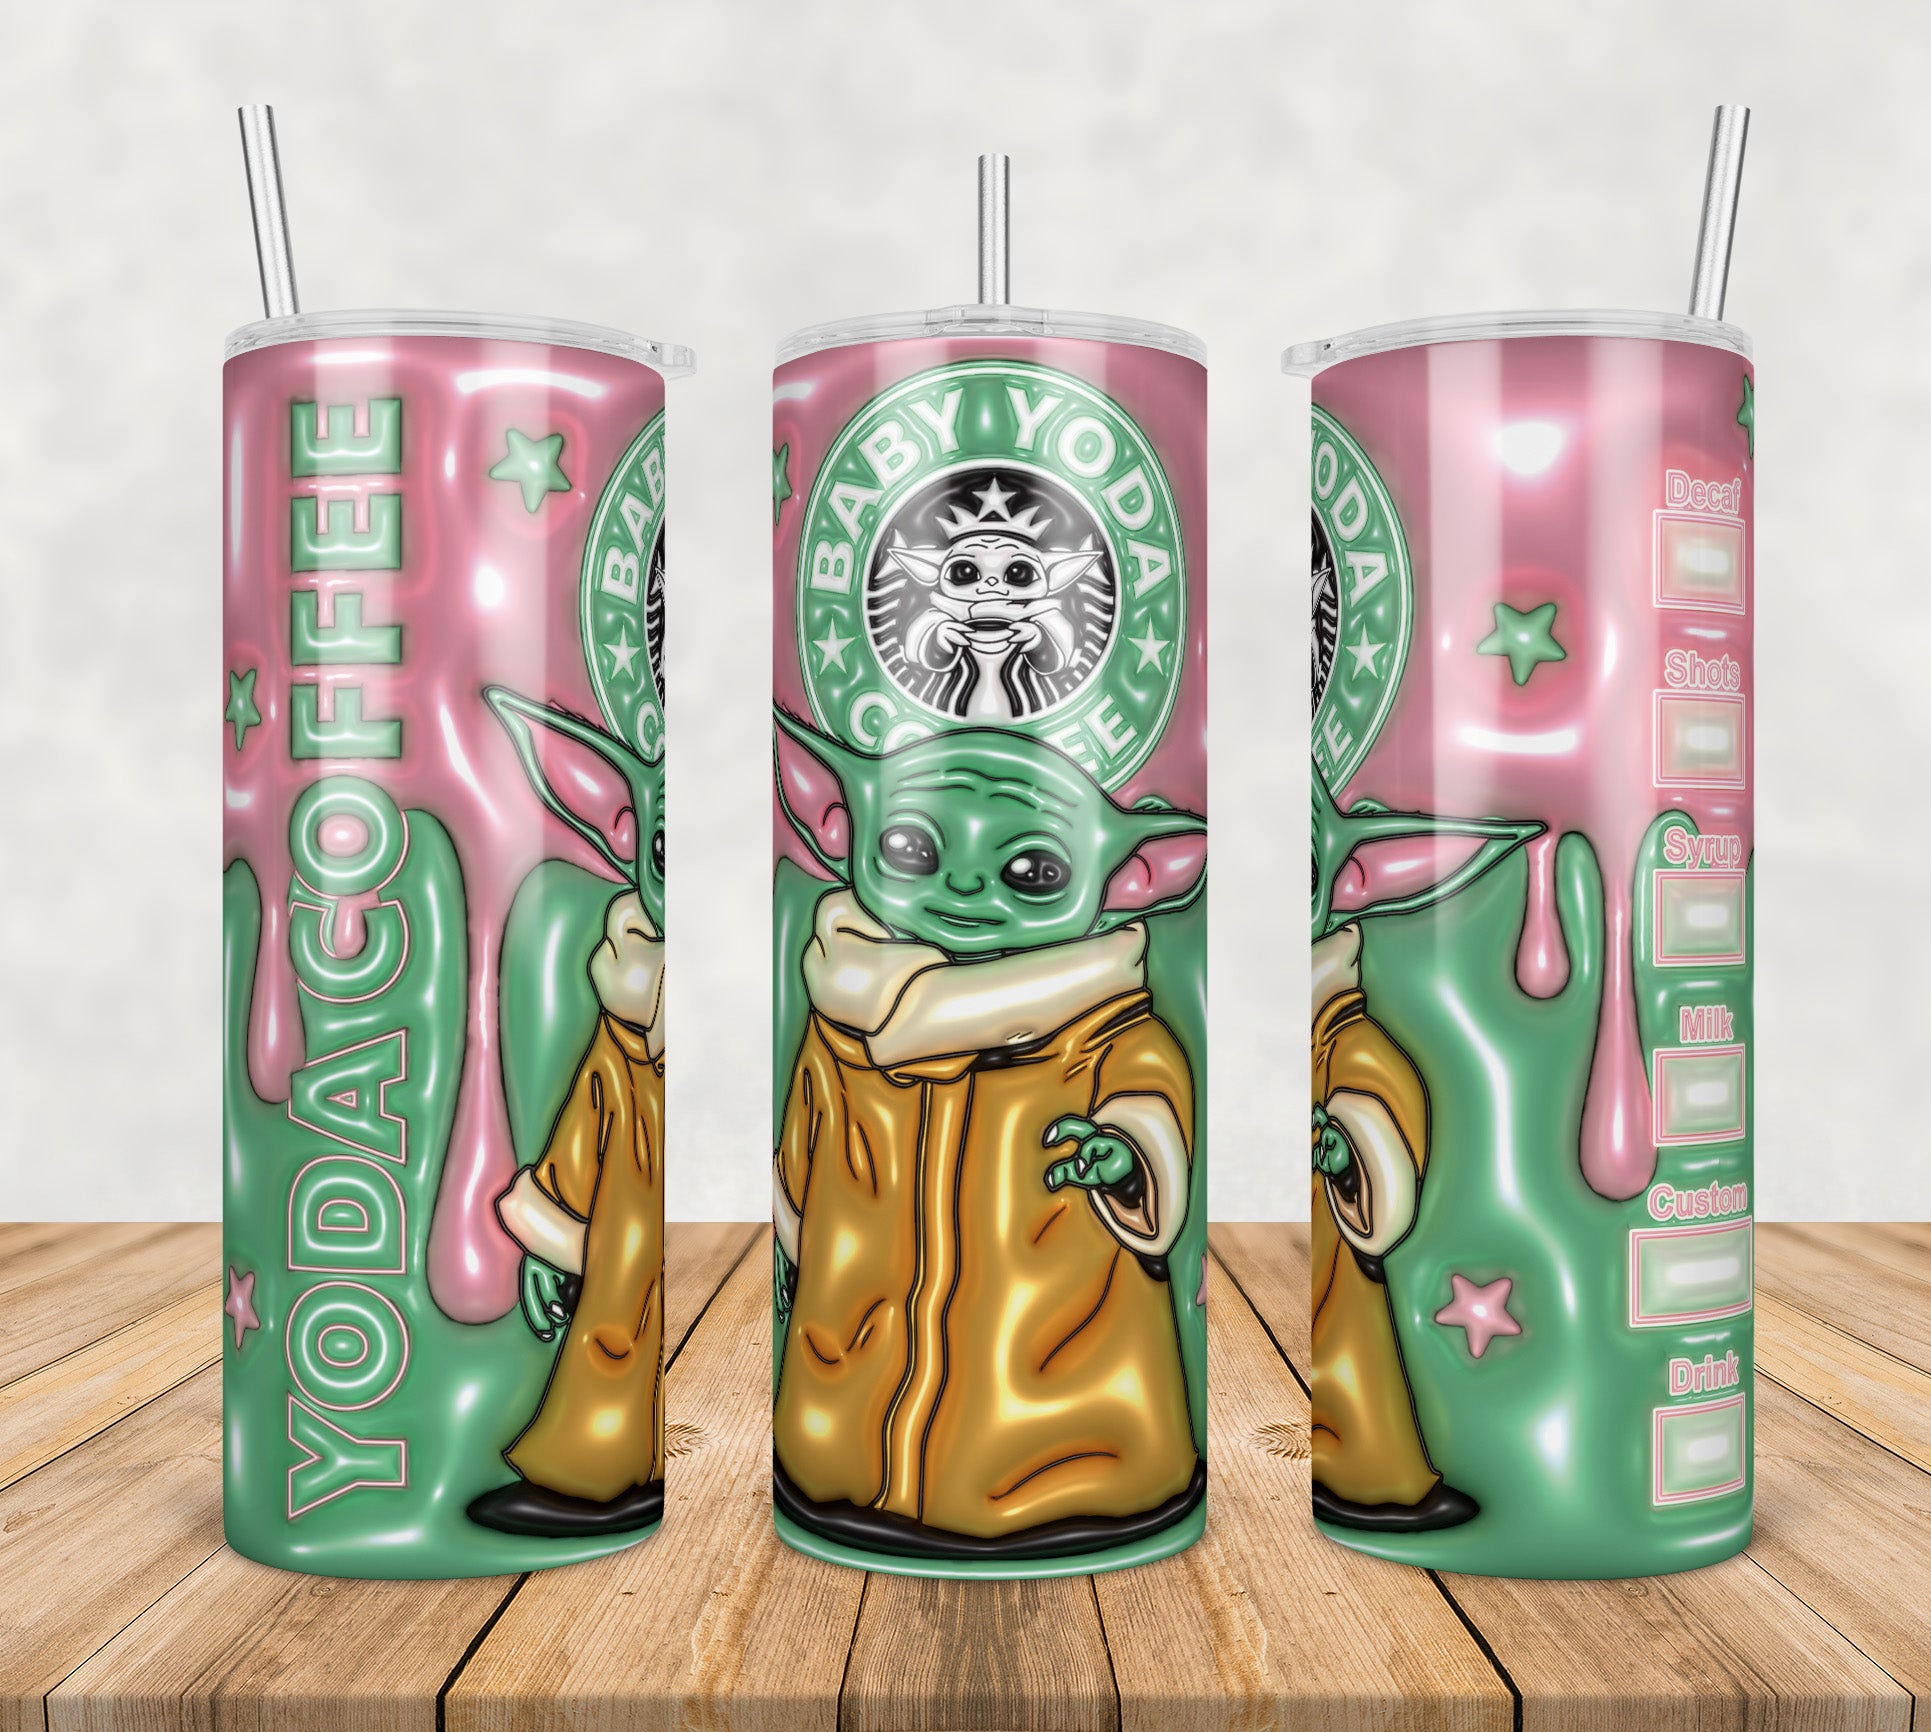 Baby Yoda Inflated 3D Tumbler Wrap Png, SG10072399